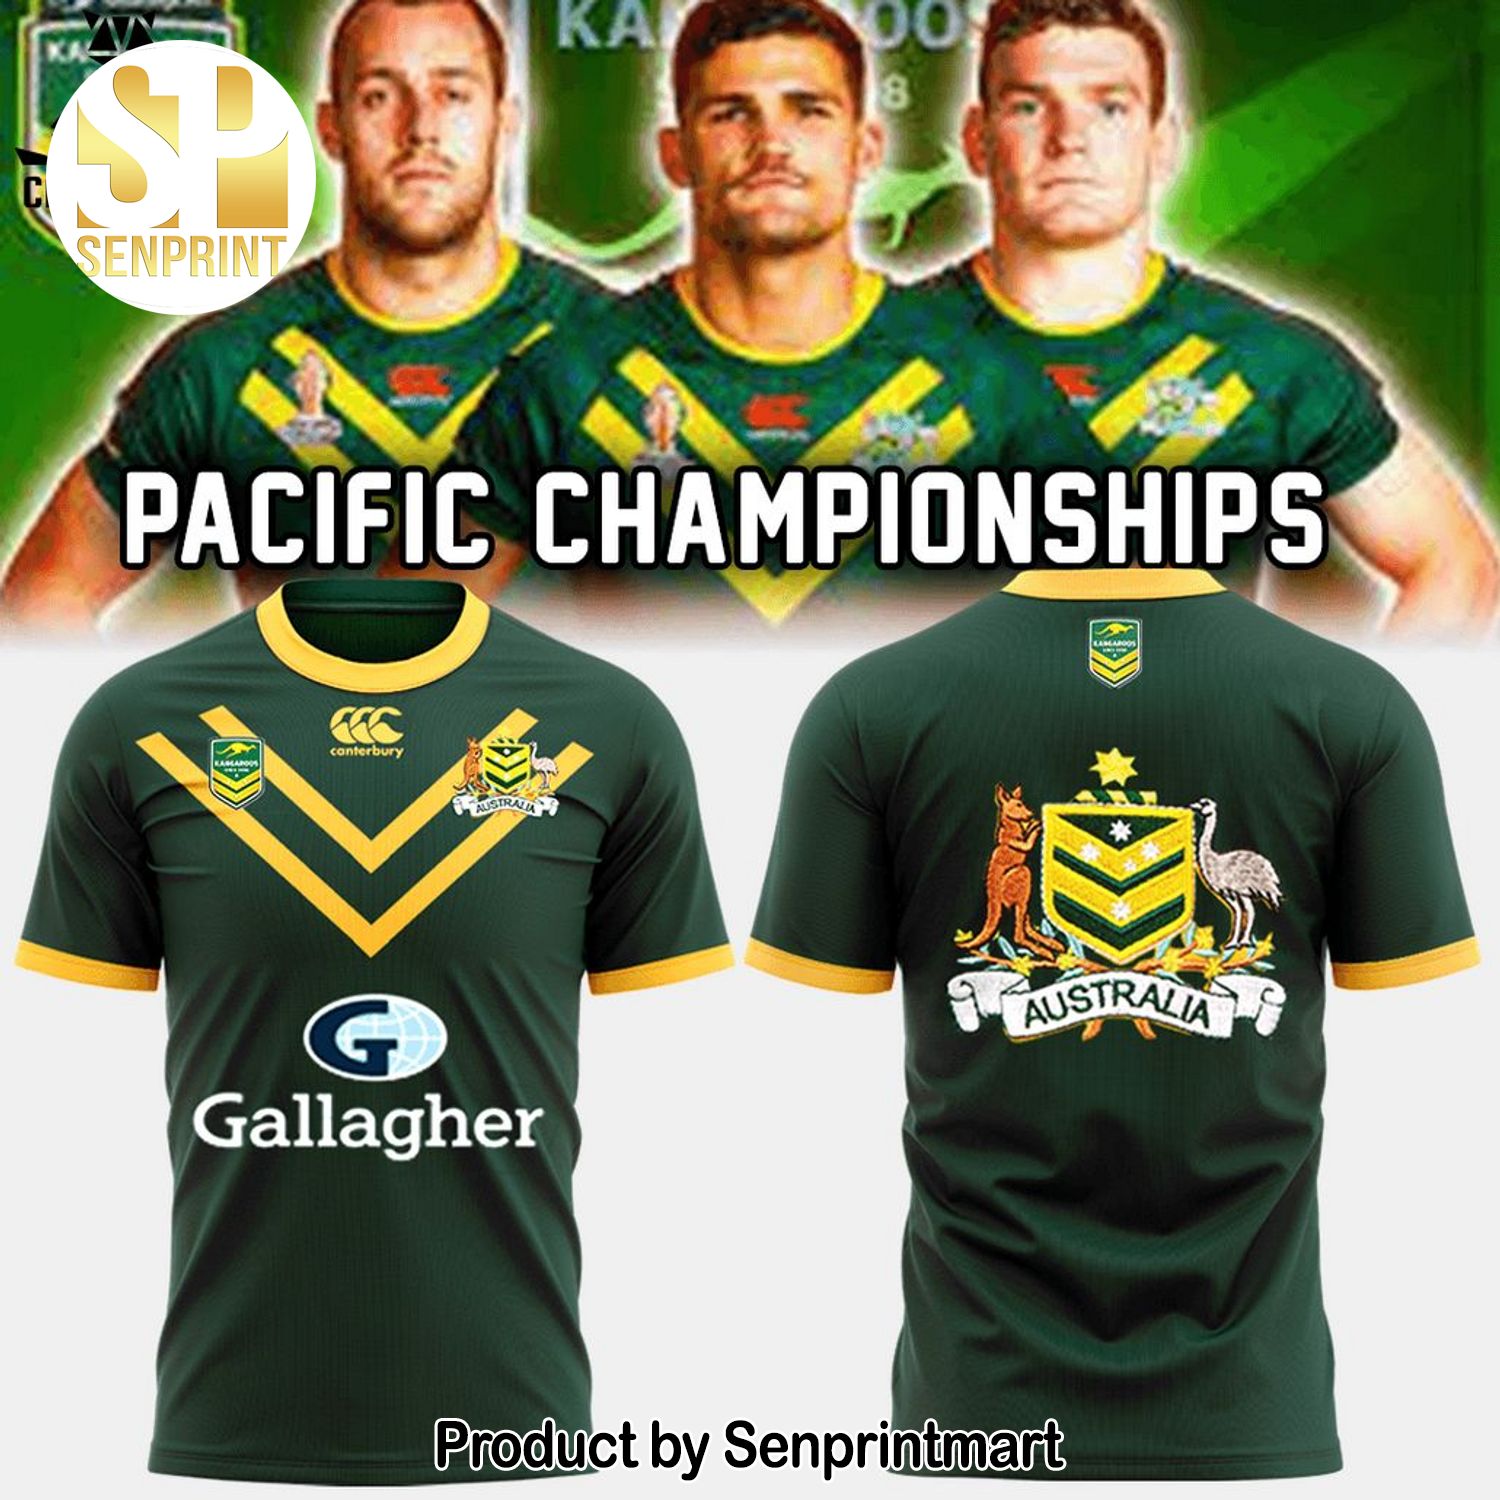 Personalized Australian Kangaroos Pacific Rugby League Championships Australian Gallagher Green With Yellow Trim 3D Full Printed Shirt